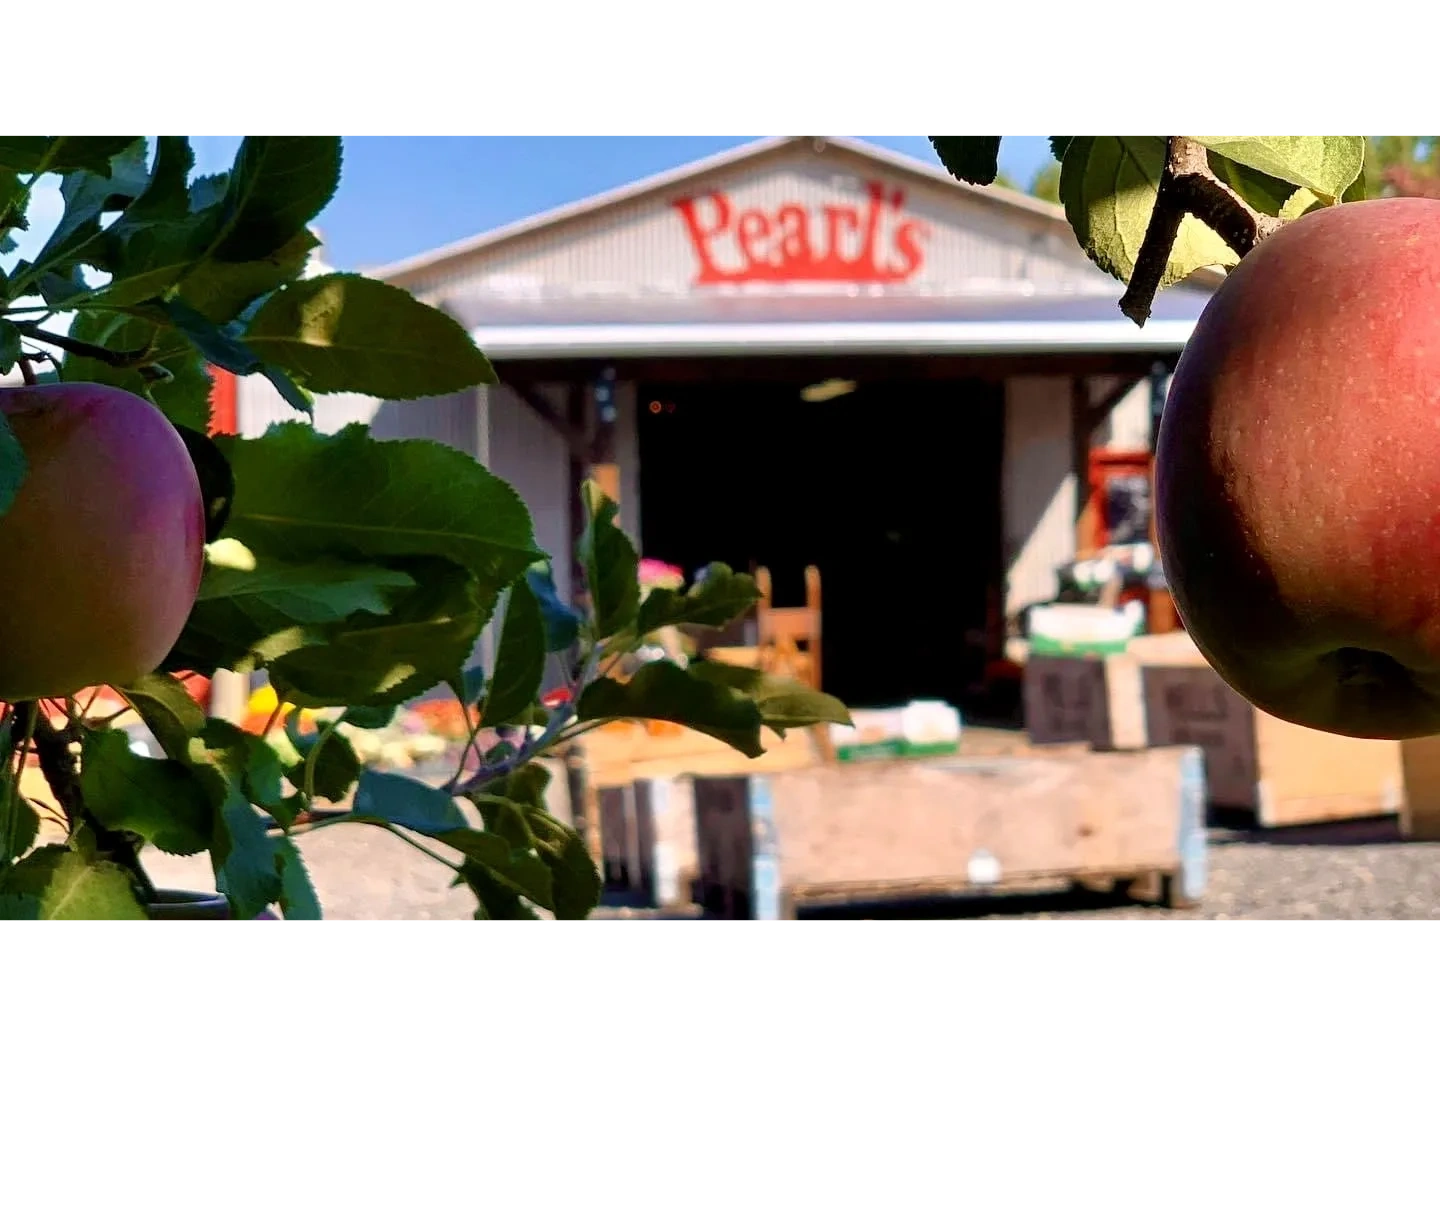 Photo of Pearl's Place Fruit Stand on  sunny day with juicy apples in the foreground.